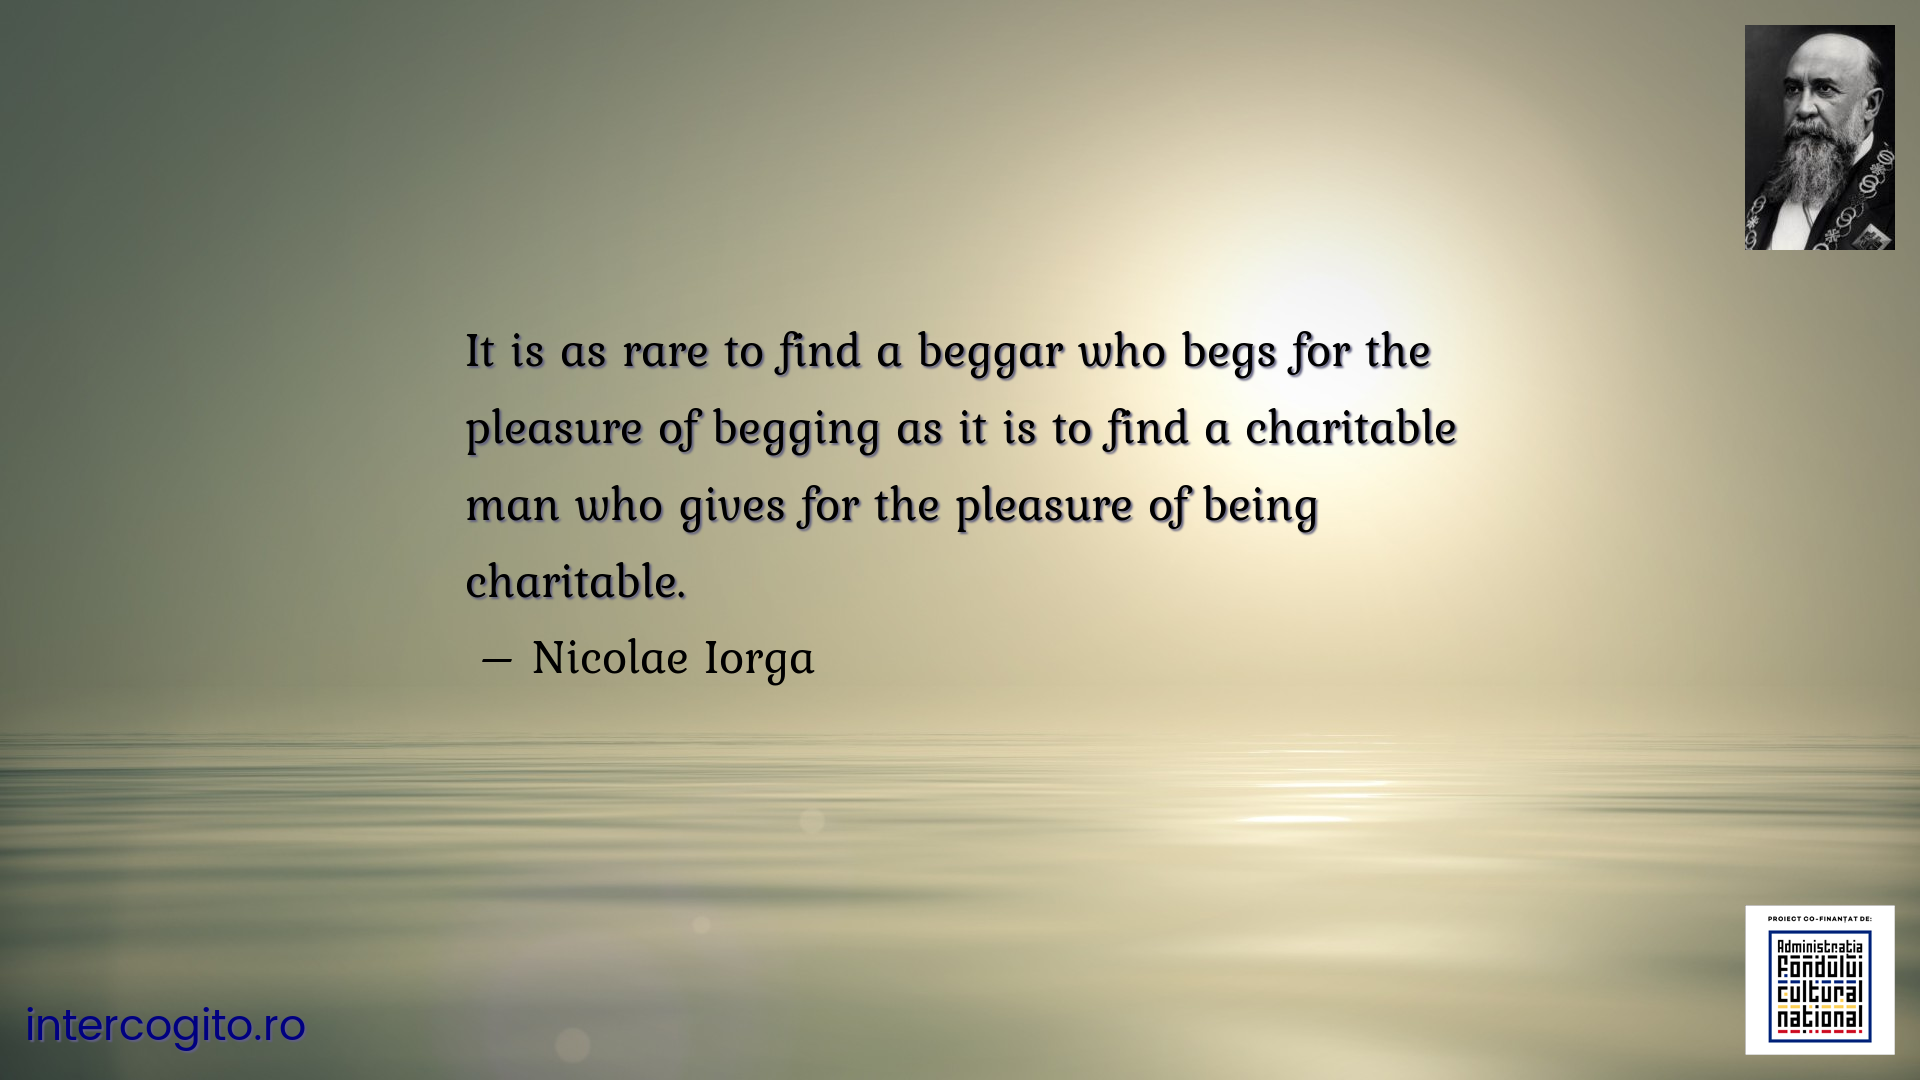 It is as rare to find a beggar who begs for the pleasure of begging as it is to find a charitable man who gives for the pleasure of being charitable.